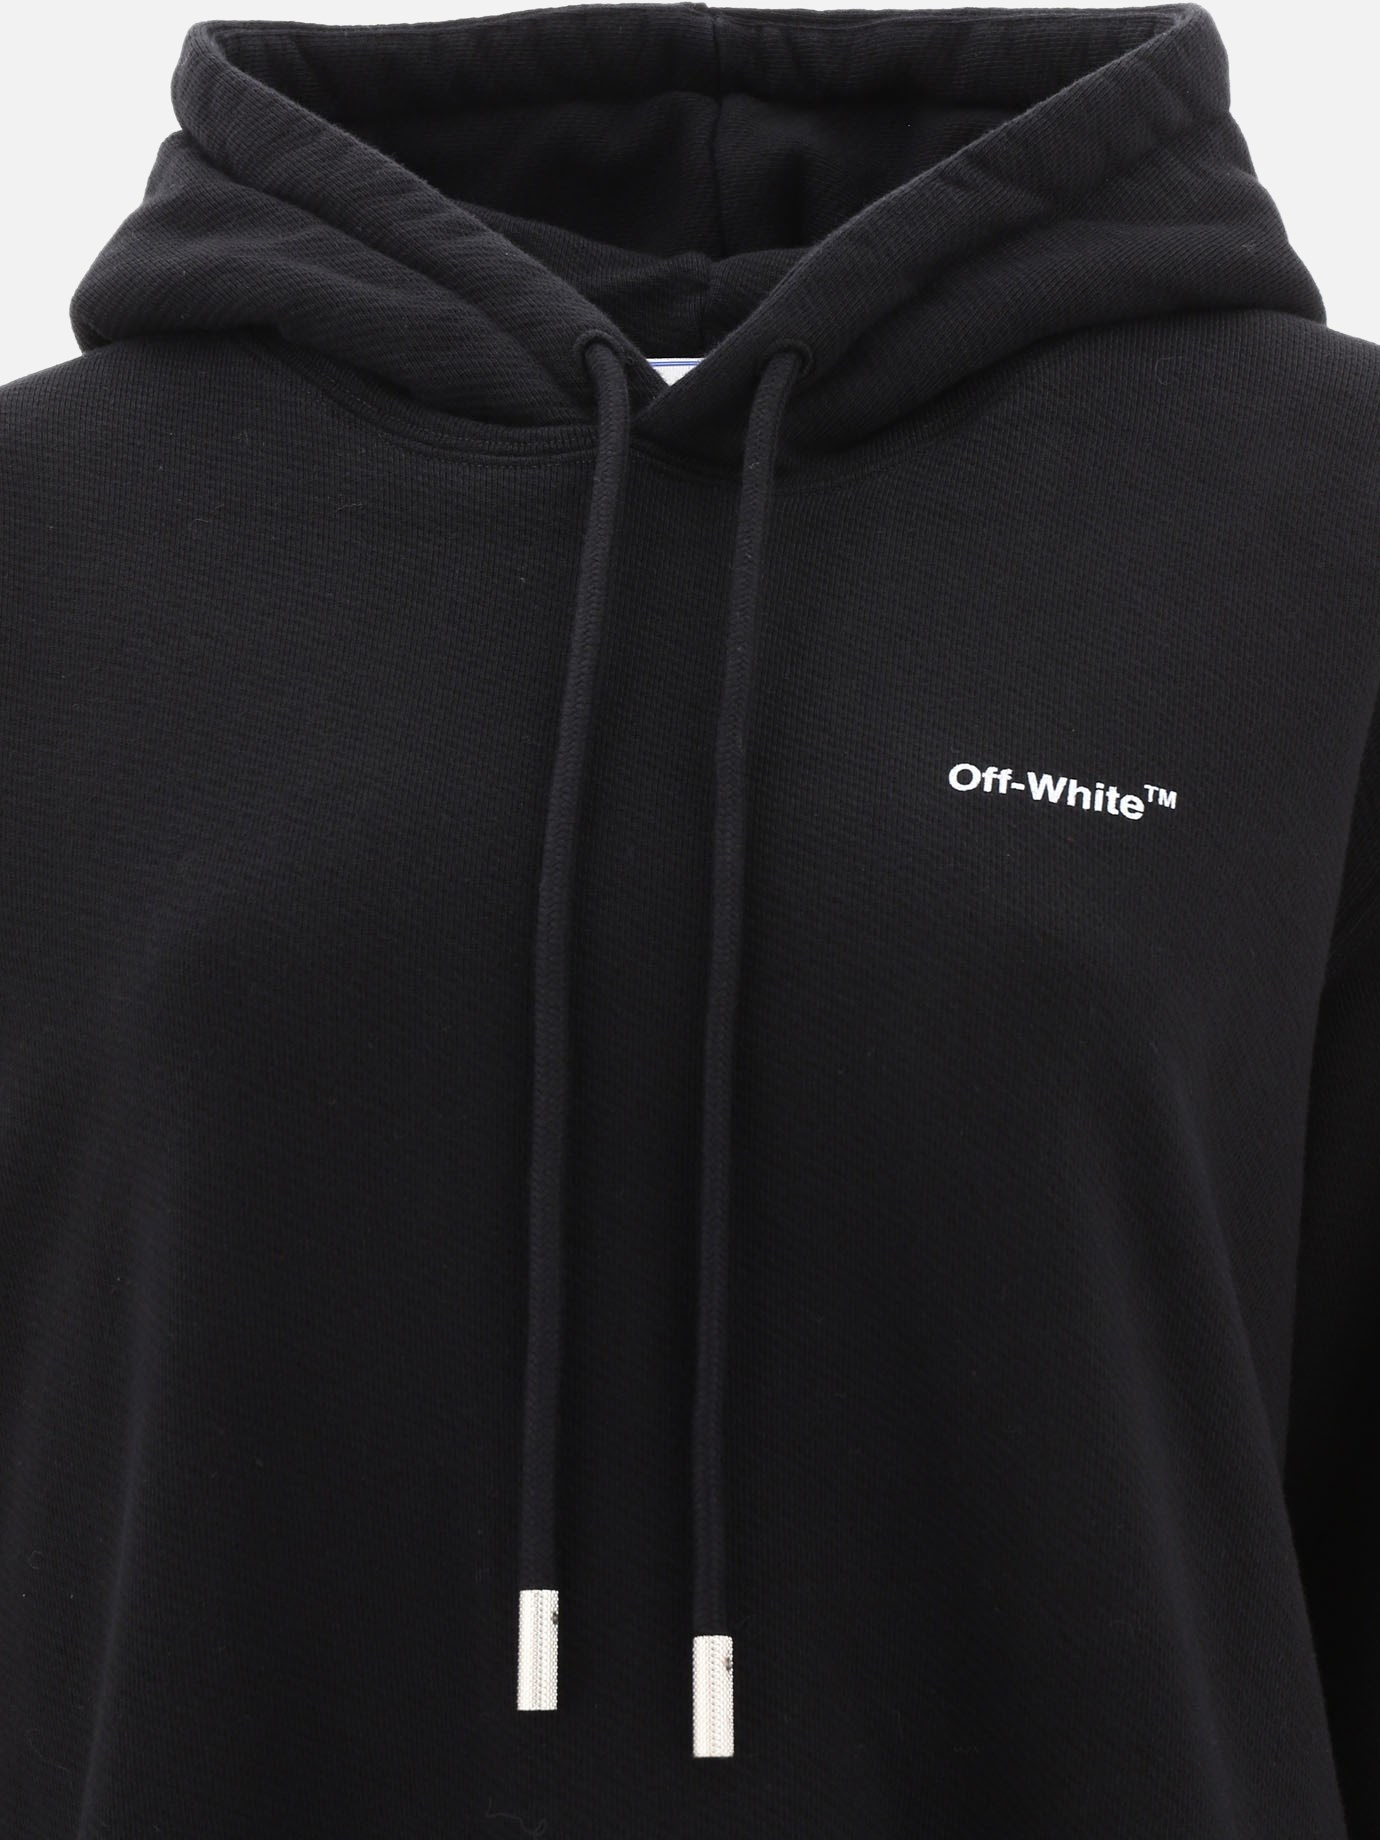  Diag  hoodie by Off-White